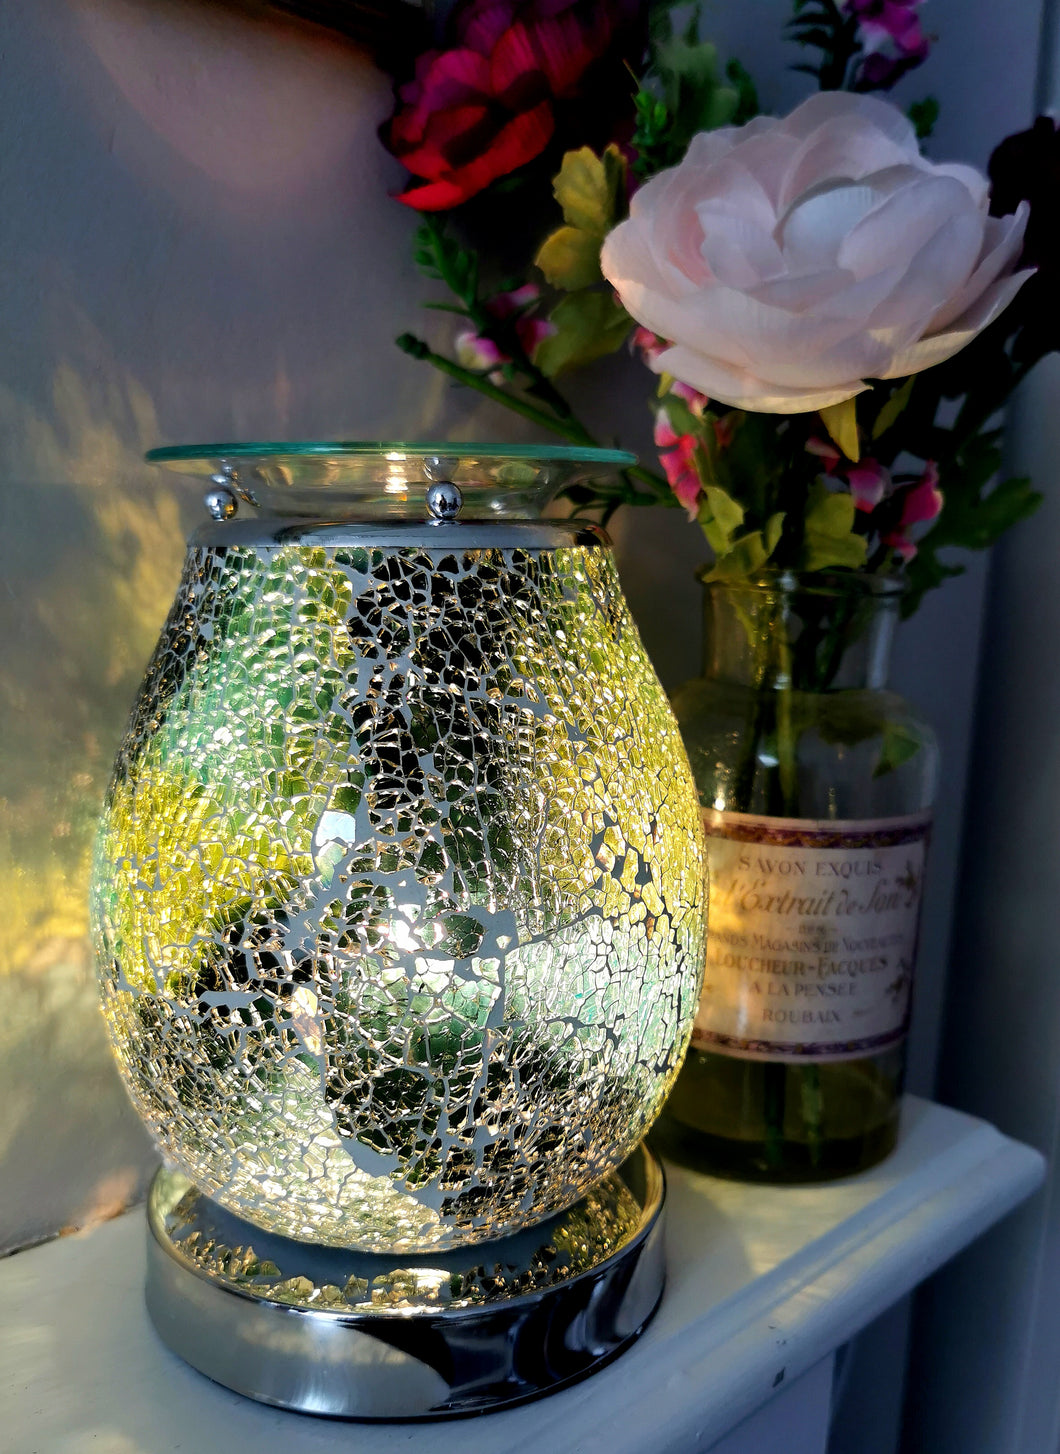 onyx green marbled crackle glass mosaic aroma lamp manufactired by desire. silver touch sensitive base. shown switched on and glowing with light  